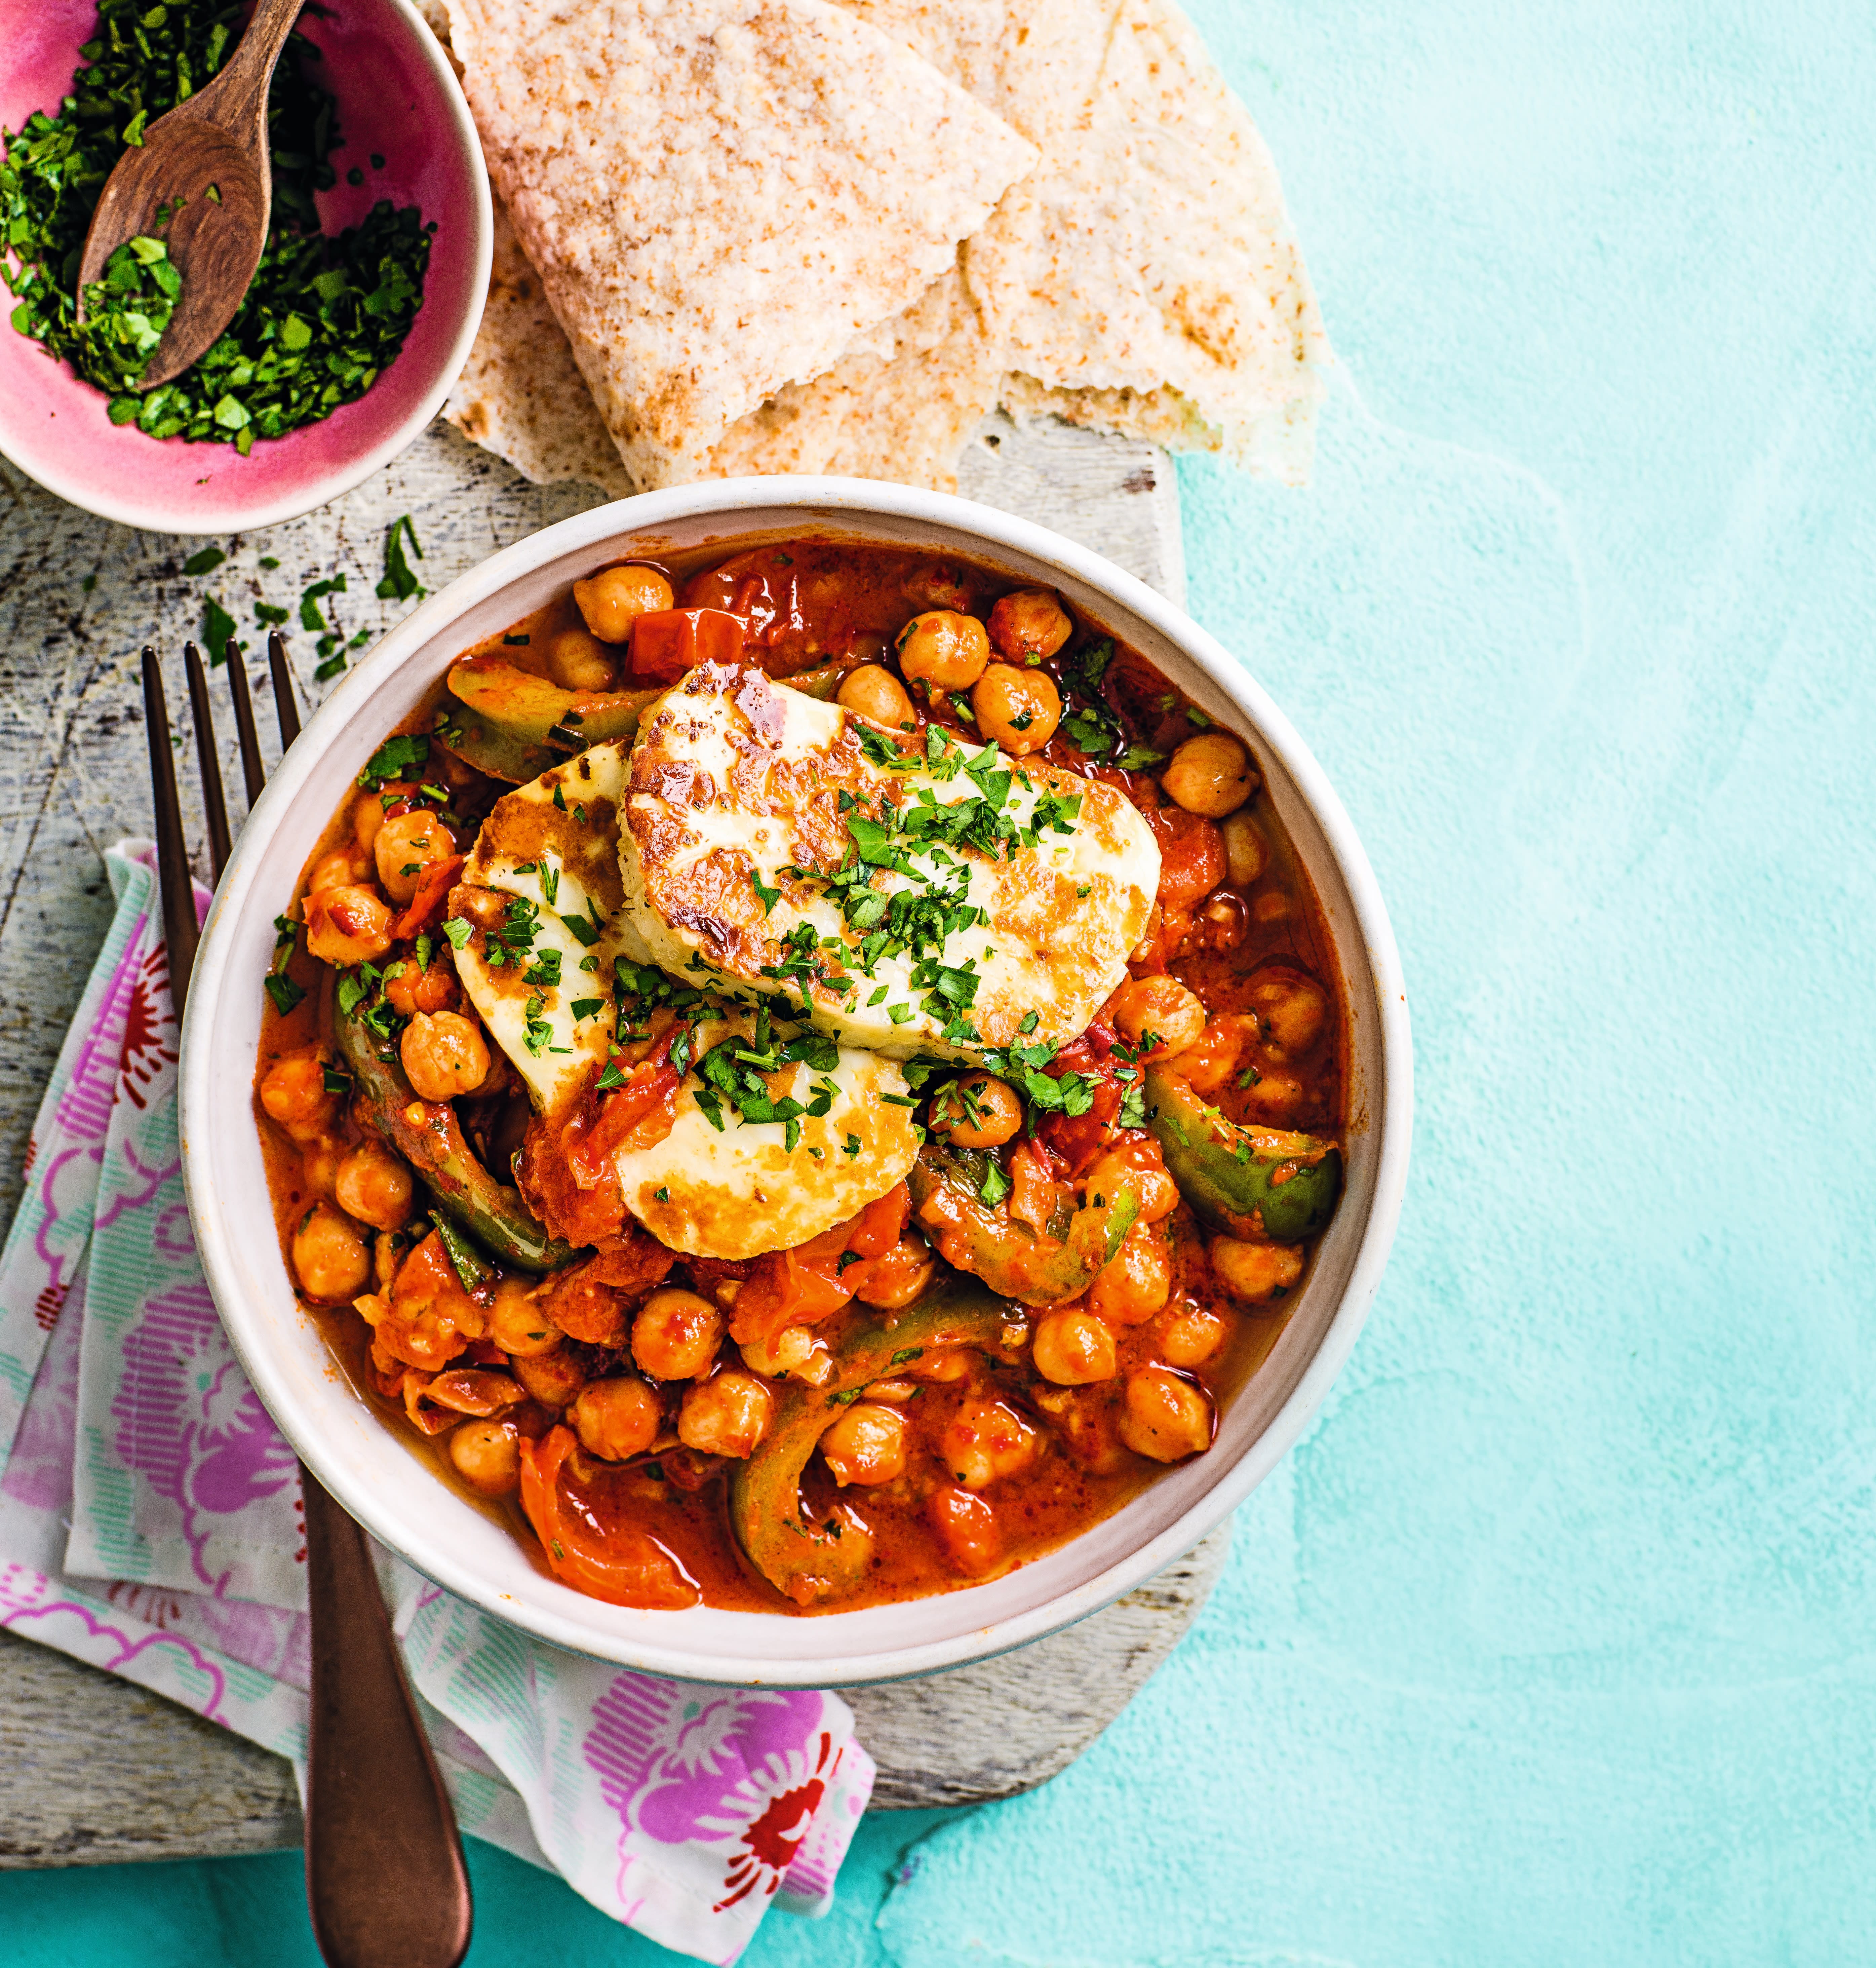 Photo of Chickpea stew with halloumi by WW